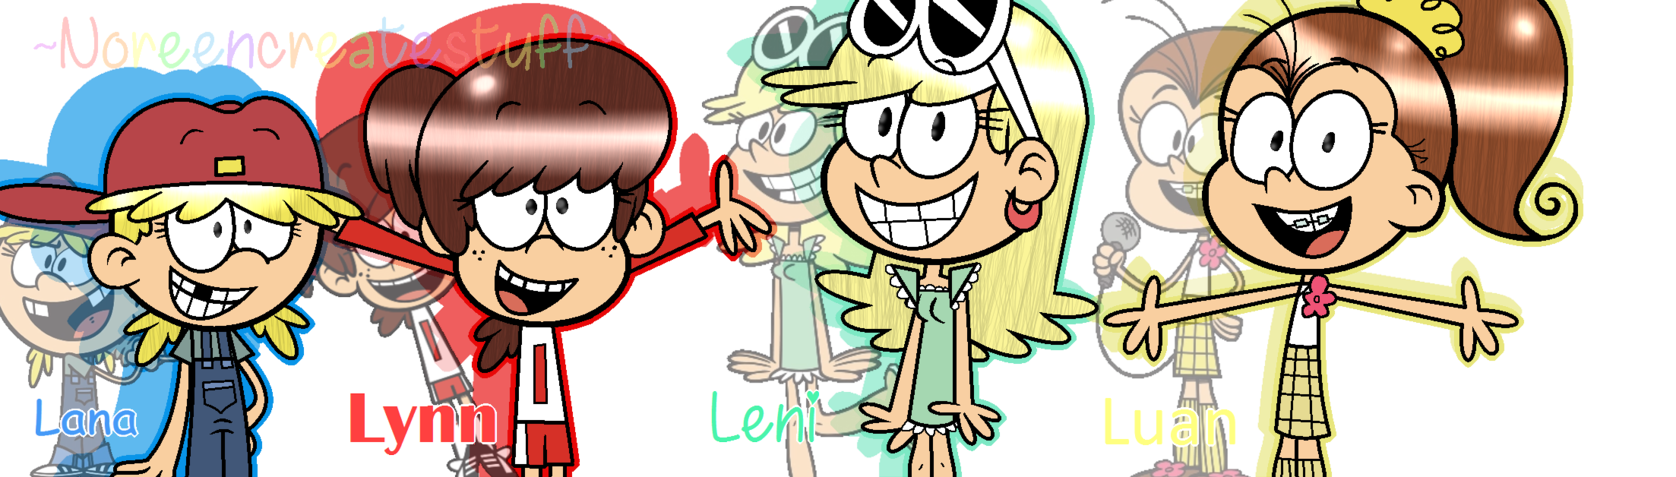 My favorite loud sisters. Excited clipart enjoyable